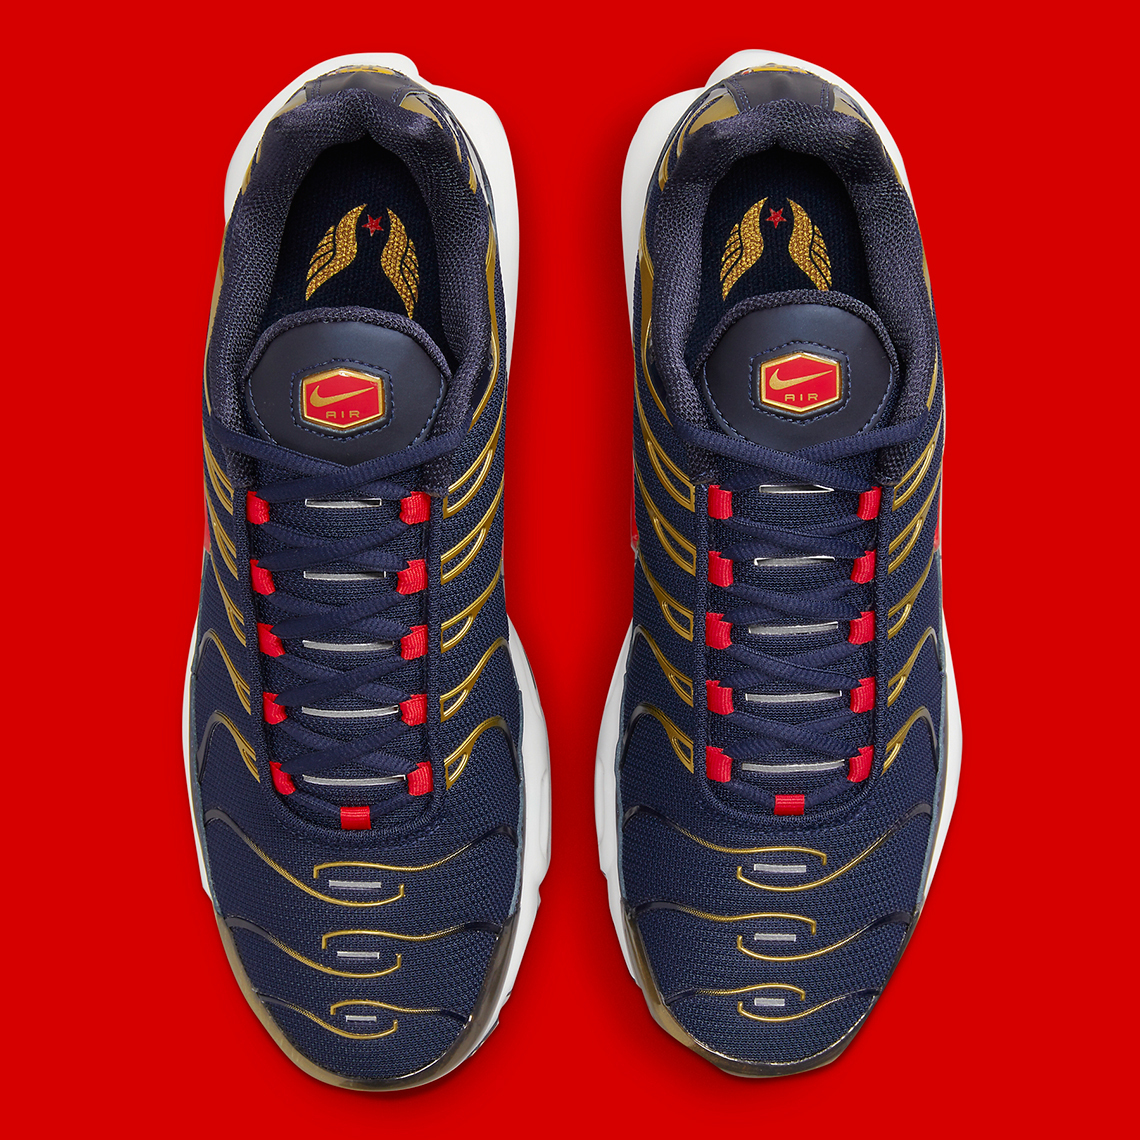 Nike Air Max Plus Olympic Dh4682 400 Release Date 3